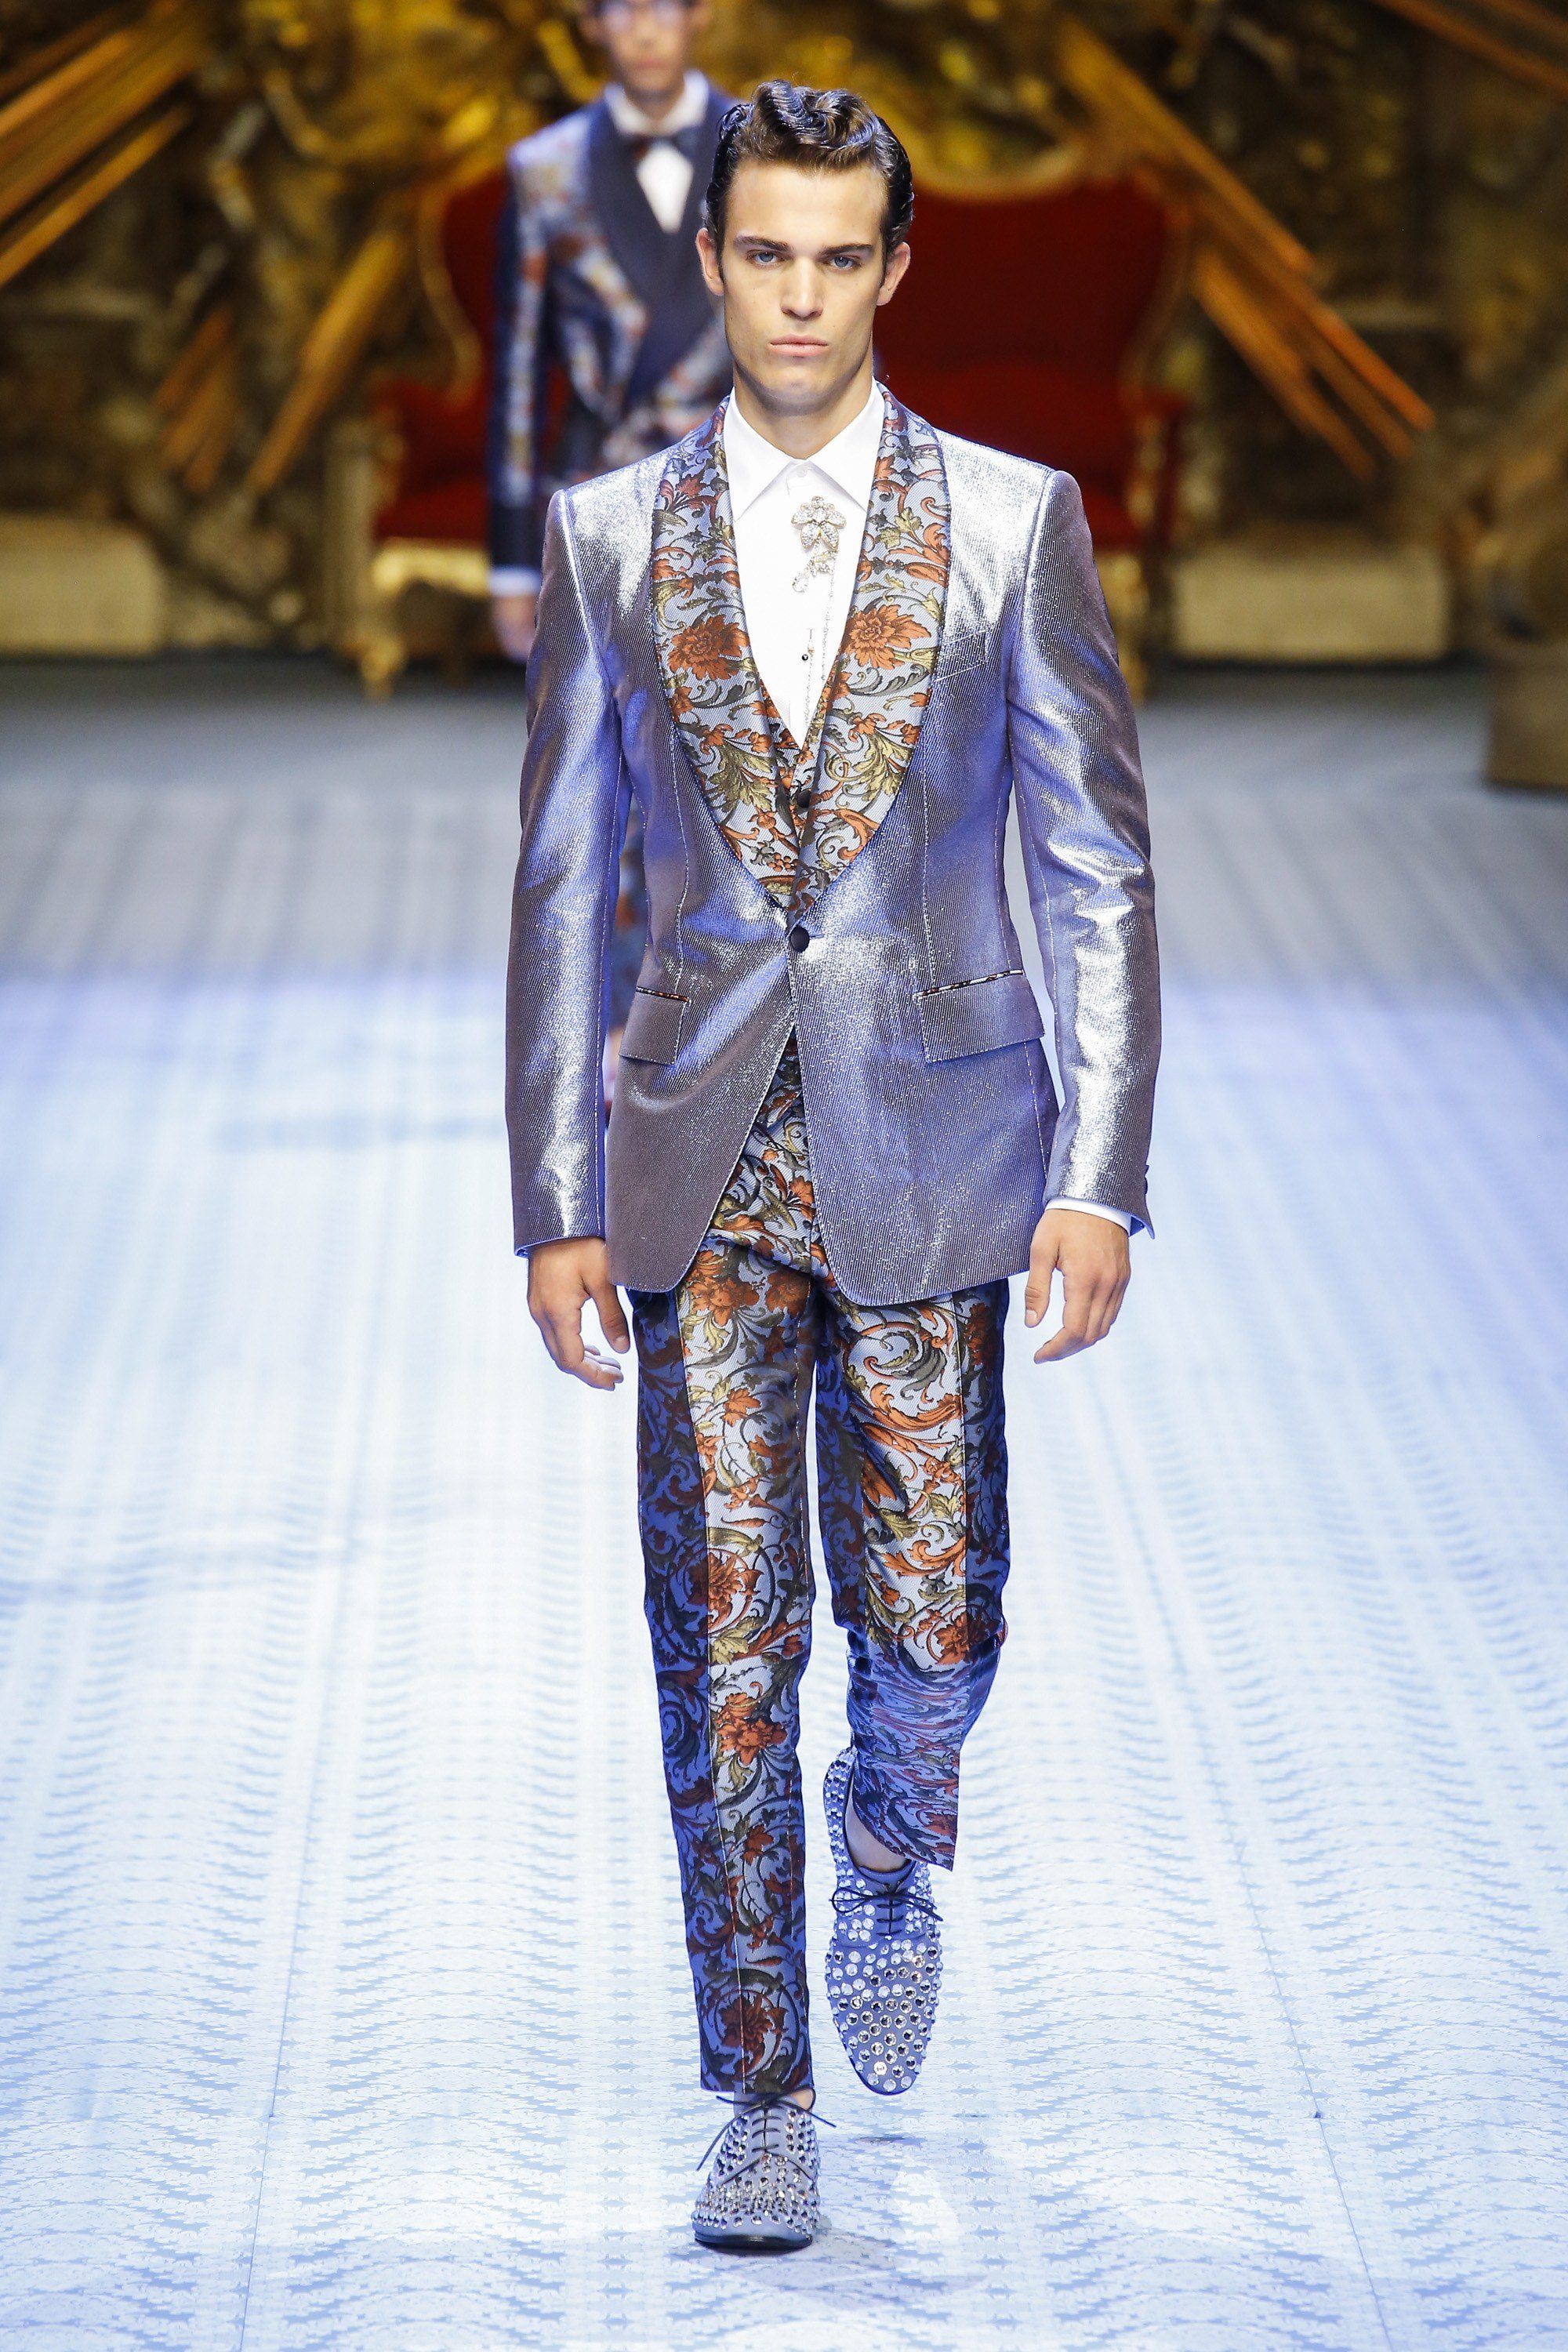 An embellished suit from Dolce & Gabbana